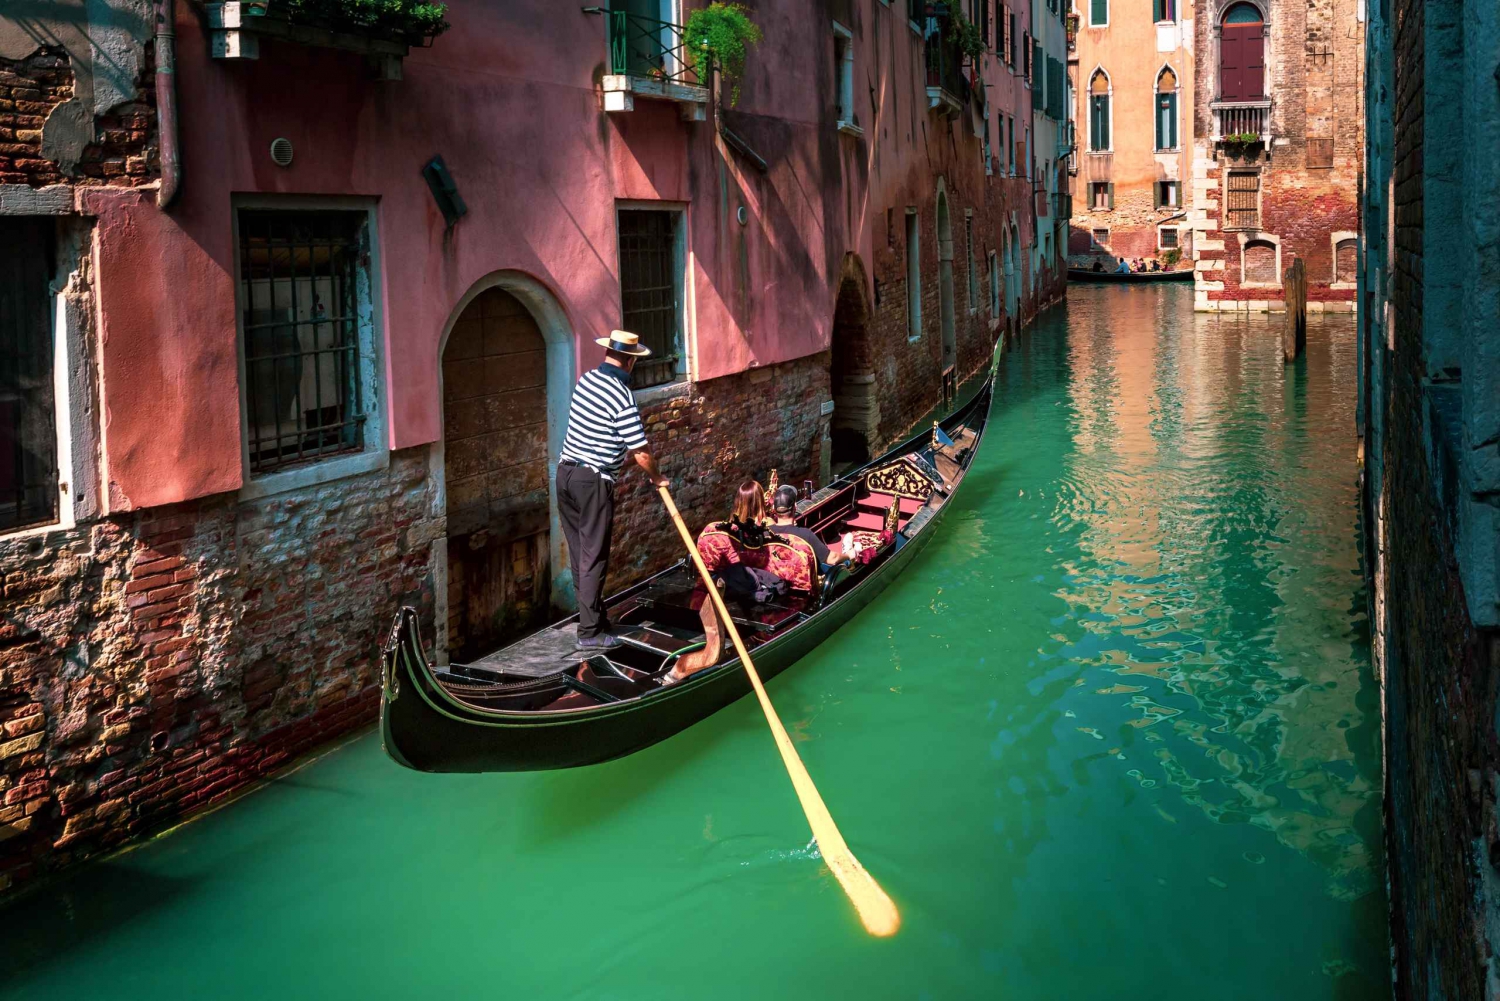 From Bologna: Private Venice Day Trip with Transfer